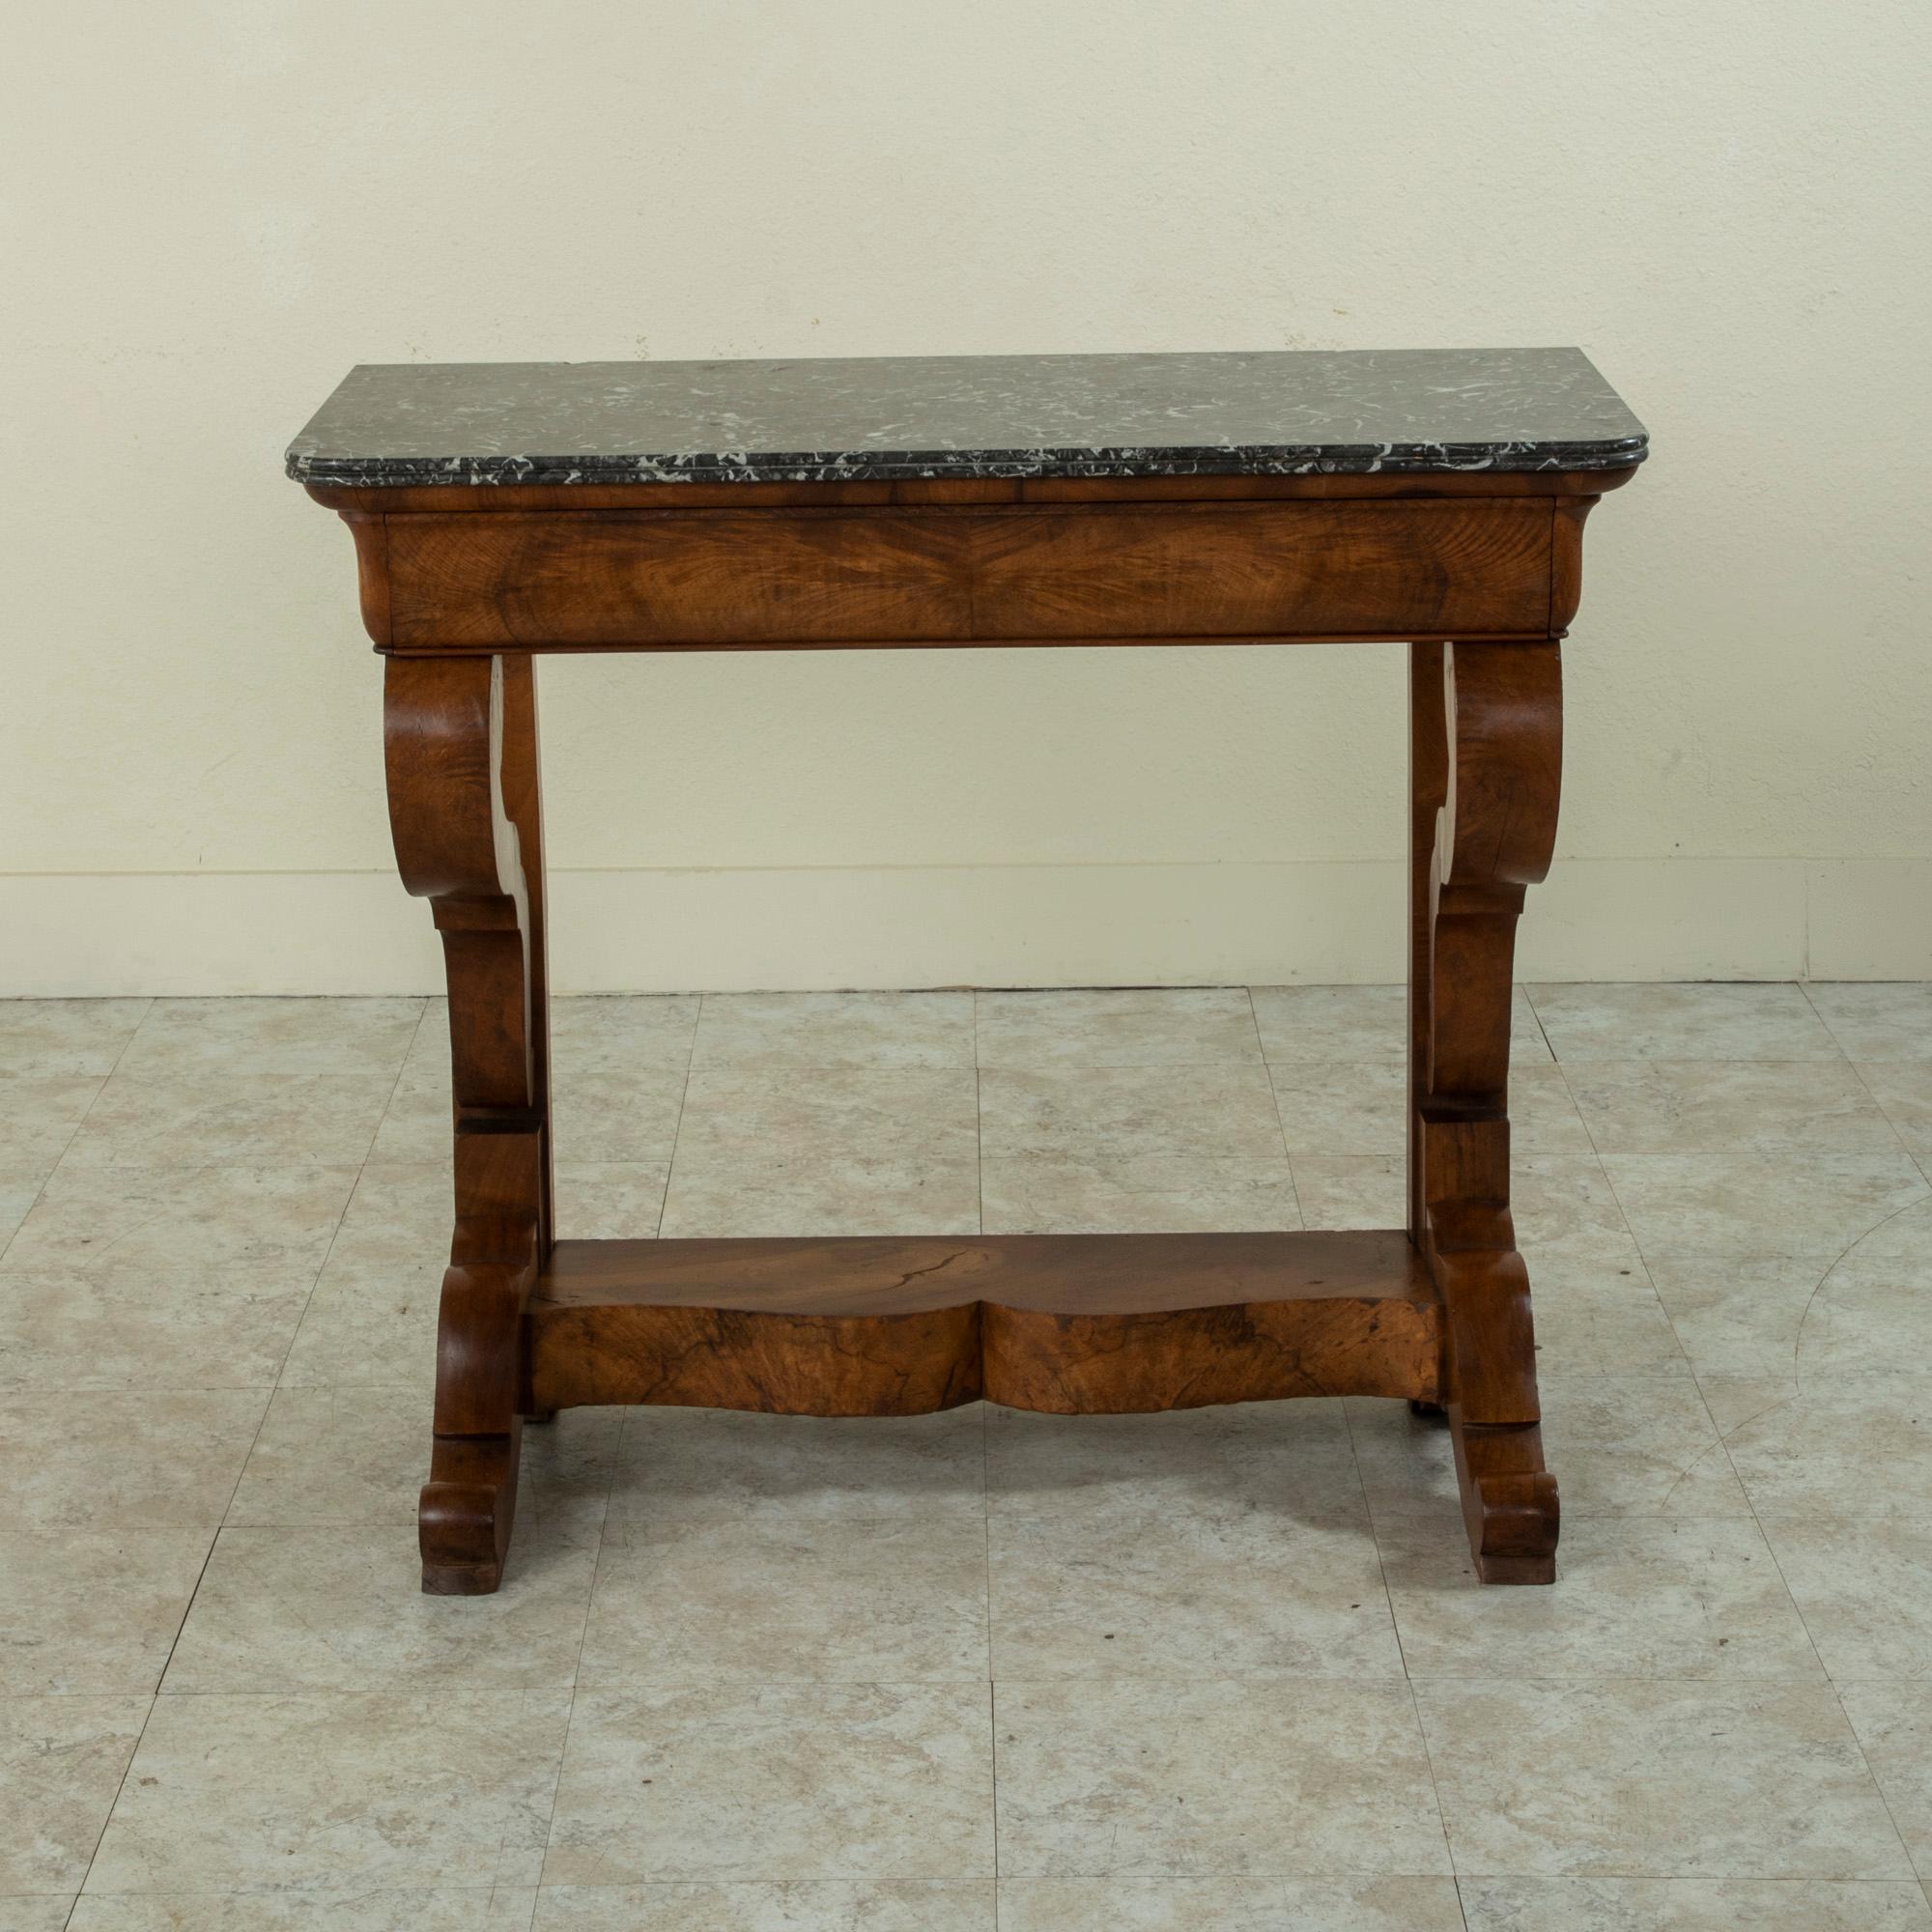 This early nineteenth century French Restauration period console table is constructed of burl walnut and is finished with a beveled Saint Anne marble top. A single drawer seamlessly forms the front of the upper apron. Two curved supports join the